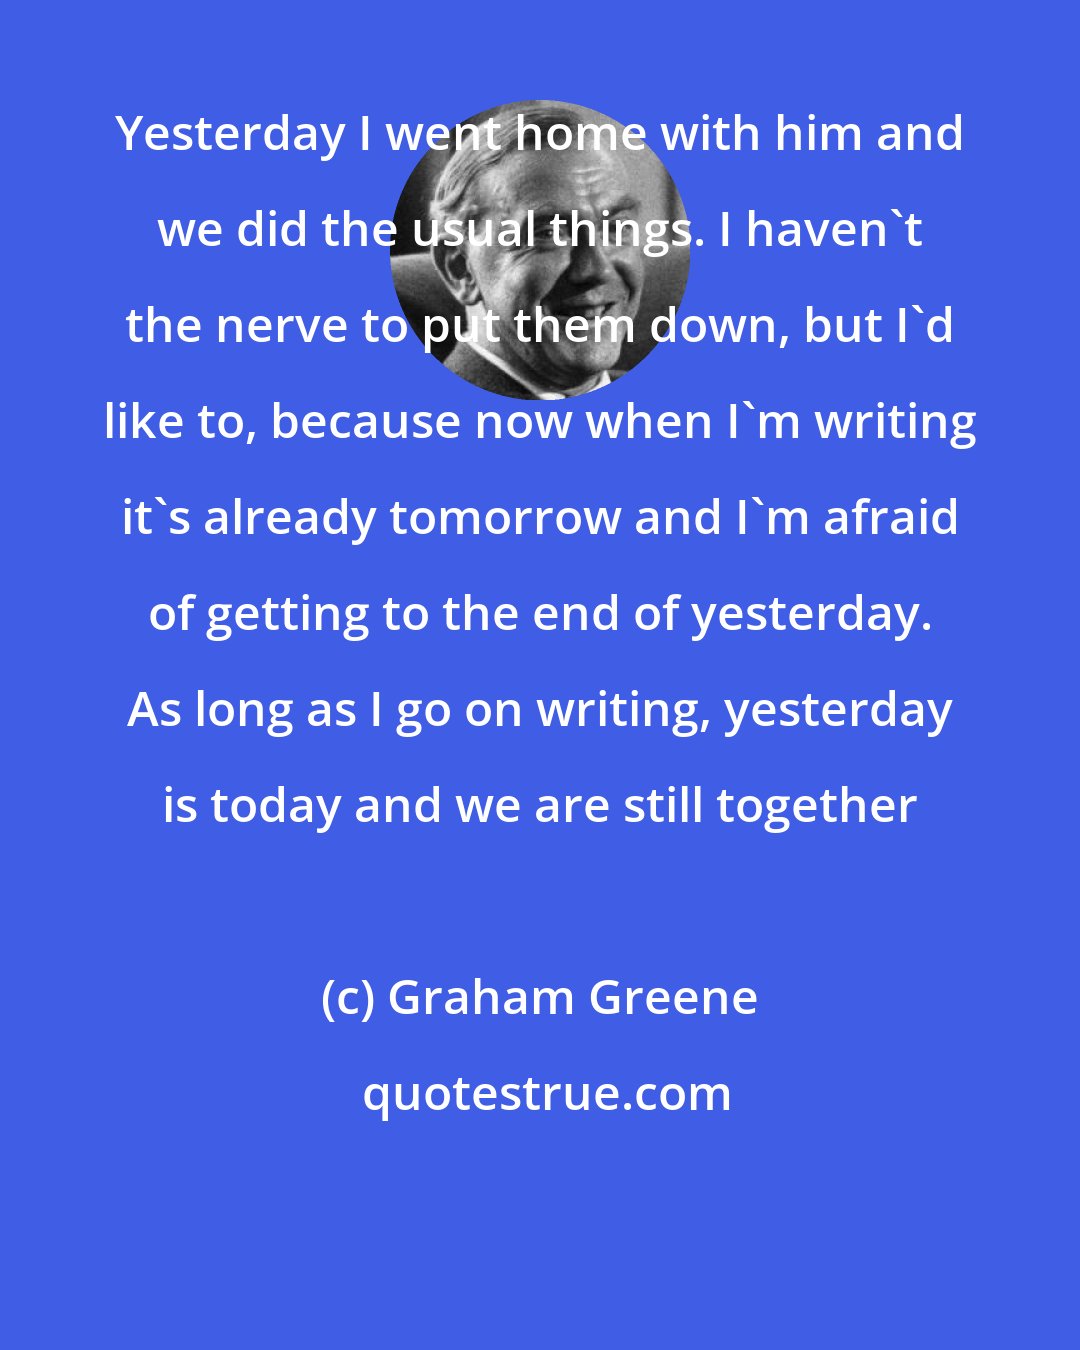 Graham Greene: Yesterday I went home with him and we did the usual things. I haven't the nerve to put them down, but I'd like to, because now when I'm writing it's already tomorrow and I'm afraid of getting to the end of yesterday. As long as I go on writing, yesterday is today and we are still together